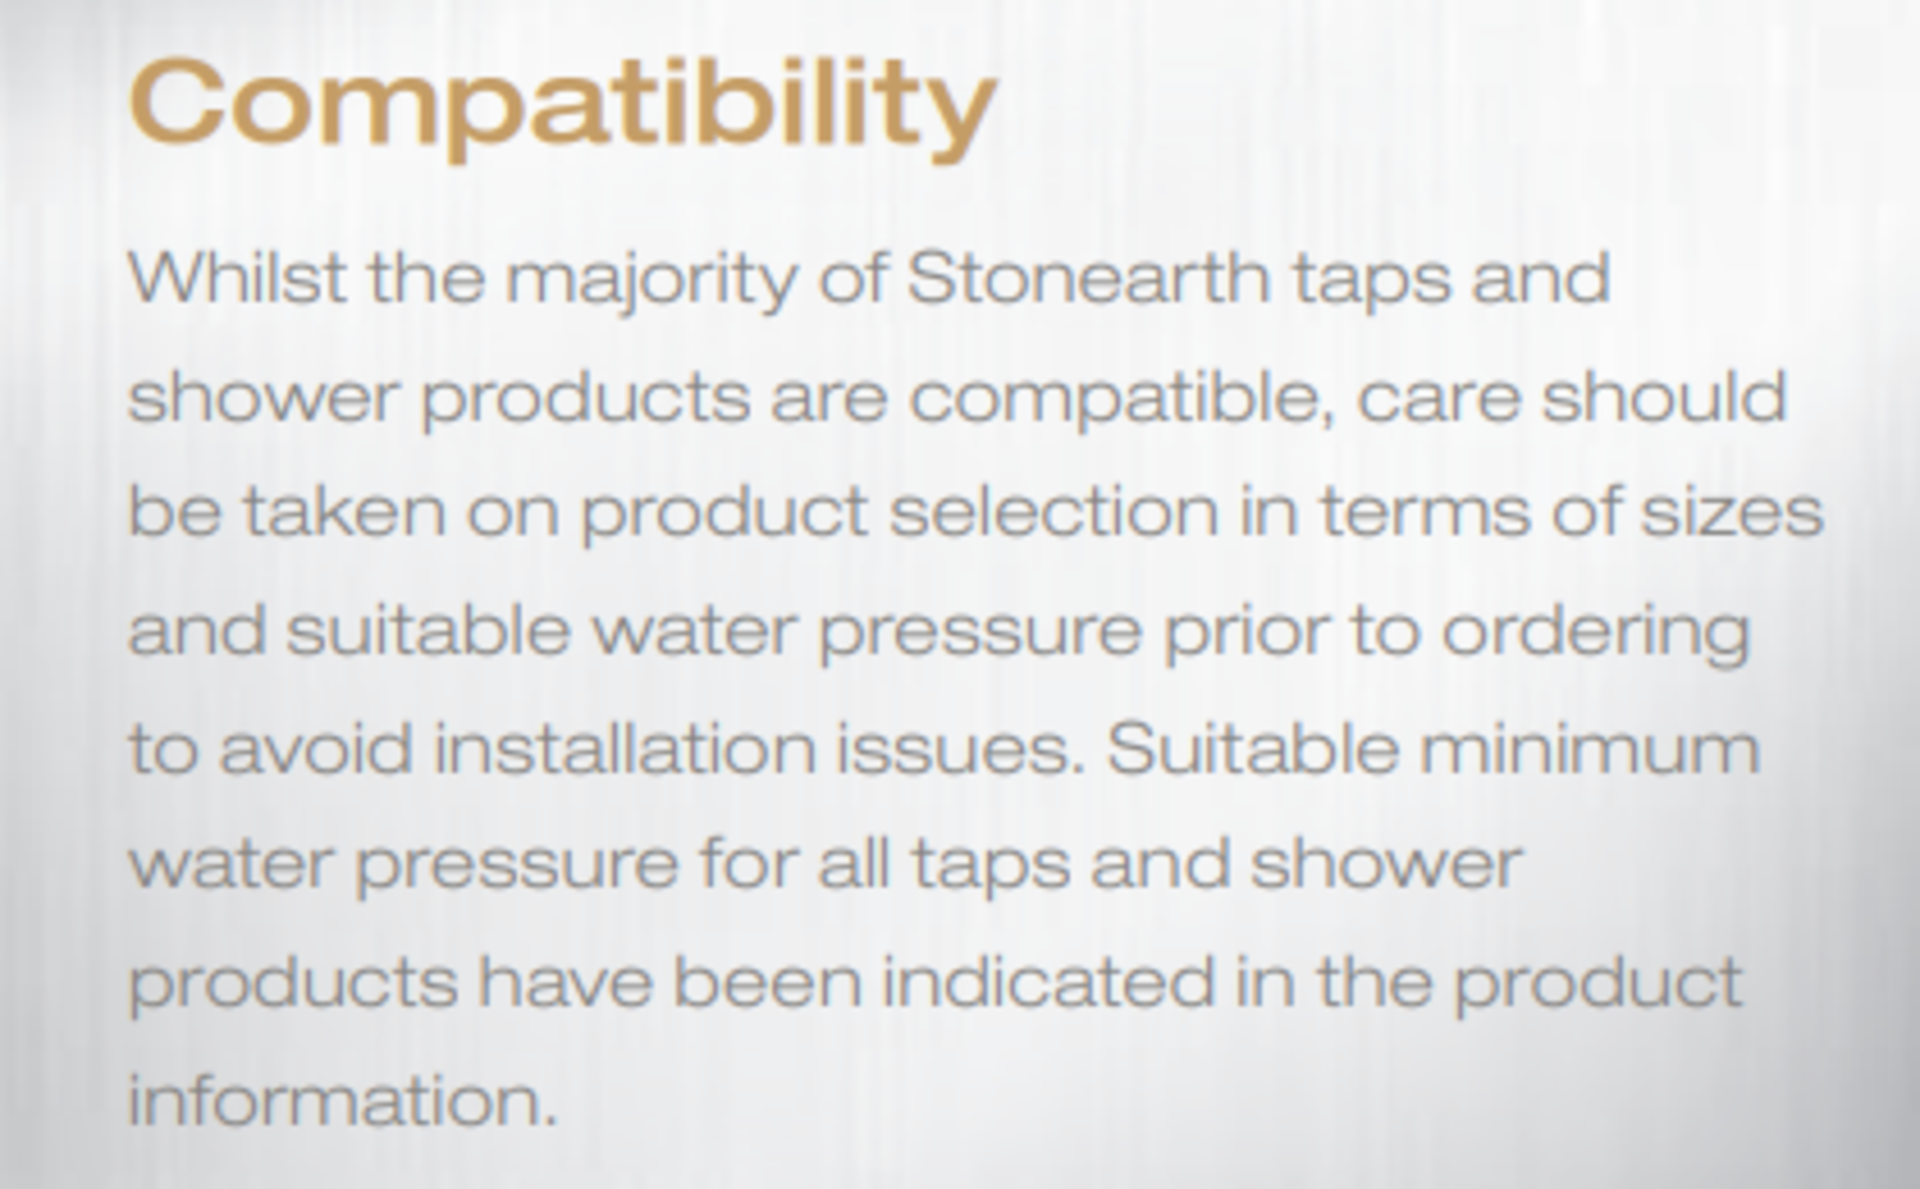 1 x Stonearth 'Metro' Stainless Steel Wall Mounted Tap - Brand New & Boxed - RRP £345 - Ref: TP823 - Image 6 of 9